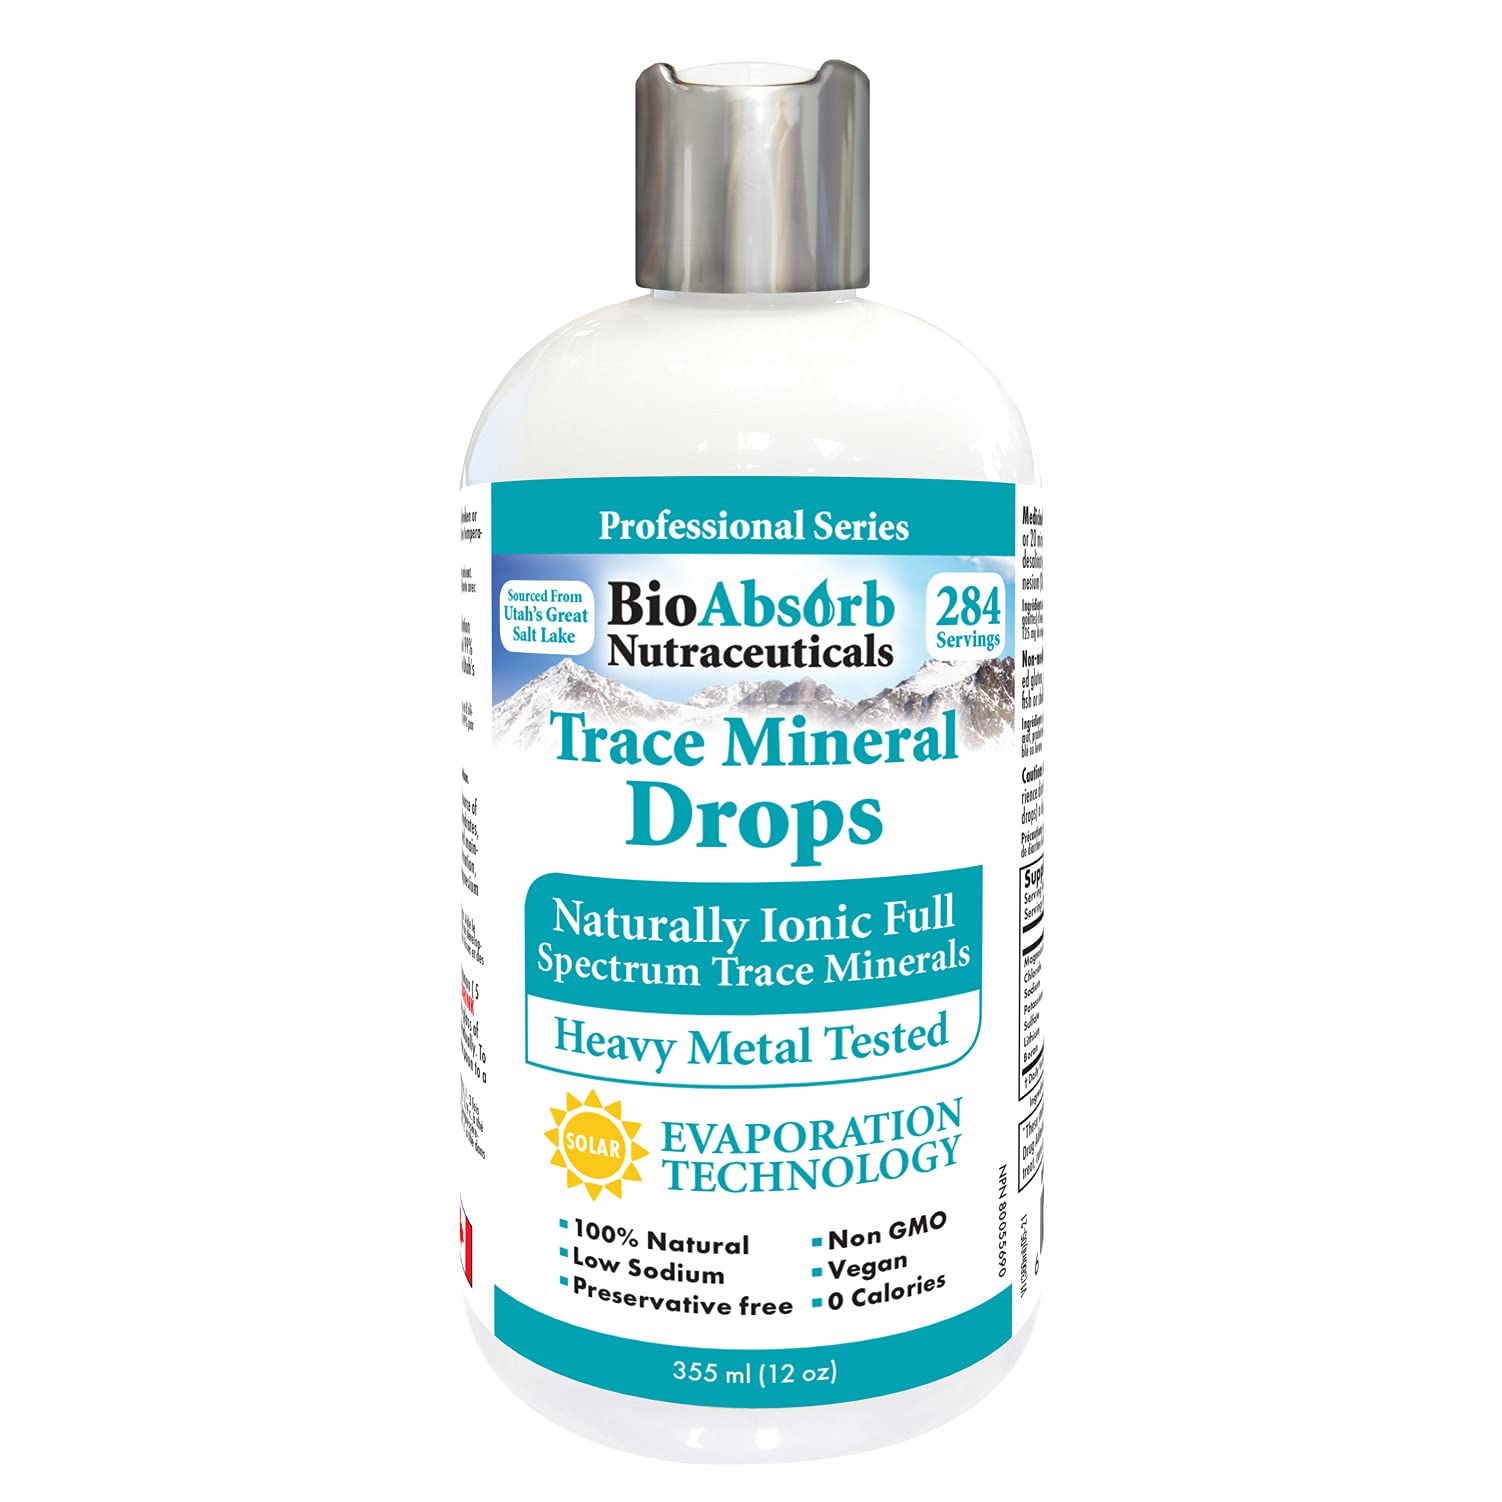 Bio Absorb Trace Mineral Drops. Heavy Metal Tested. 284 Servings of Organic Trace Minerals from Concentrated Utah's GSL Sea Water. 125mg of Ionic Magnesium (12 oz)